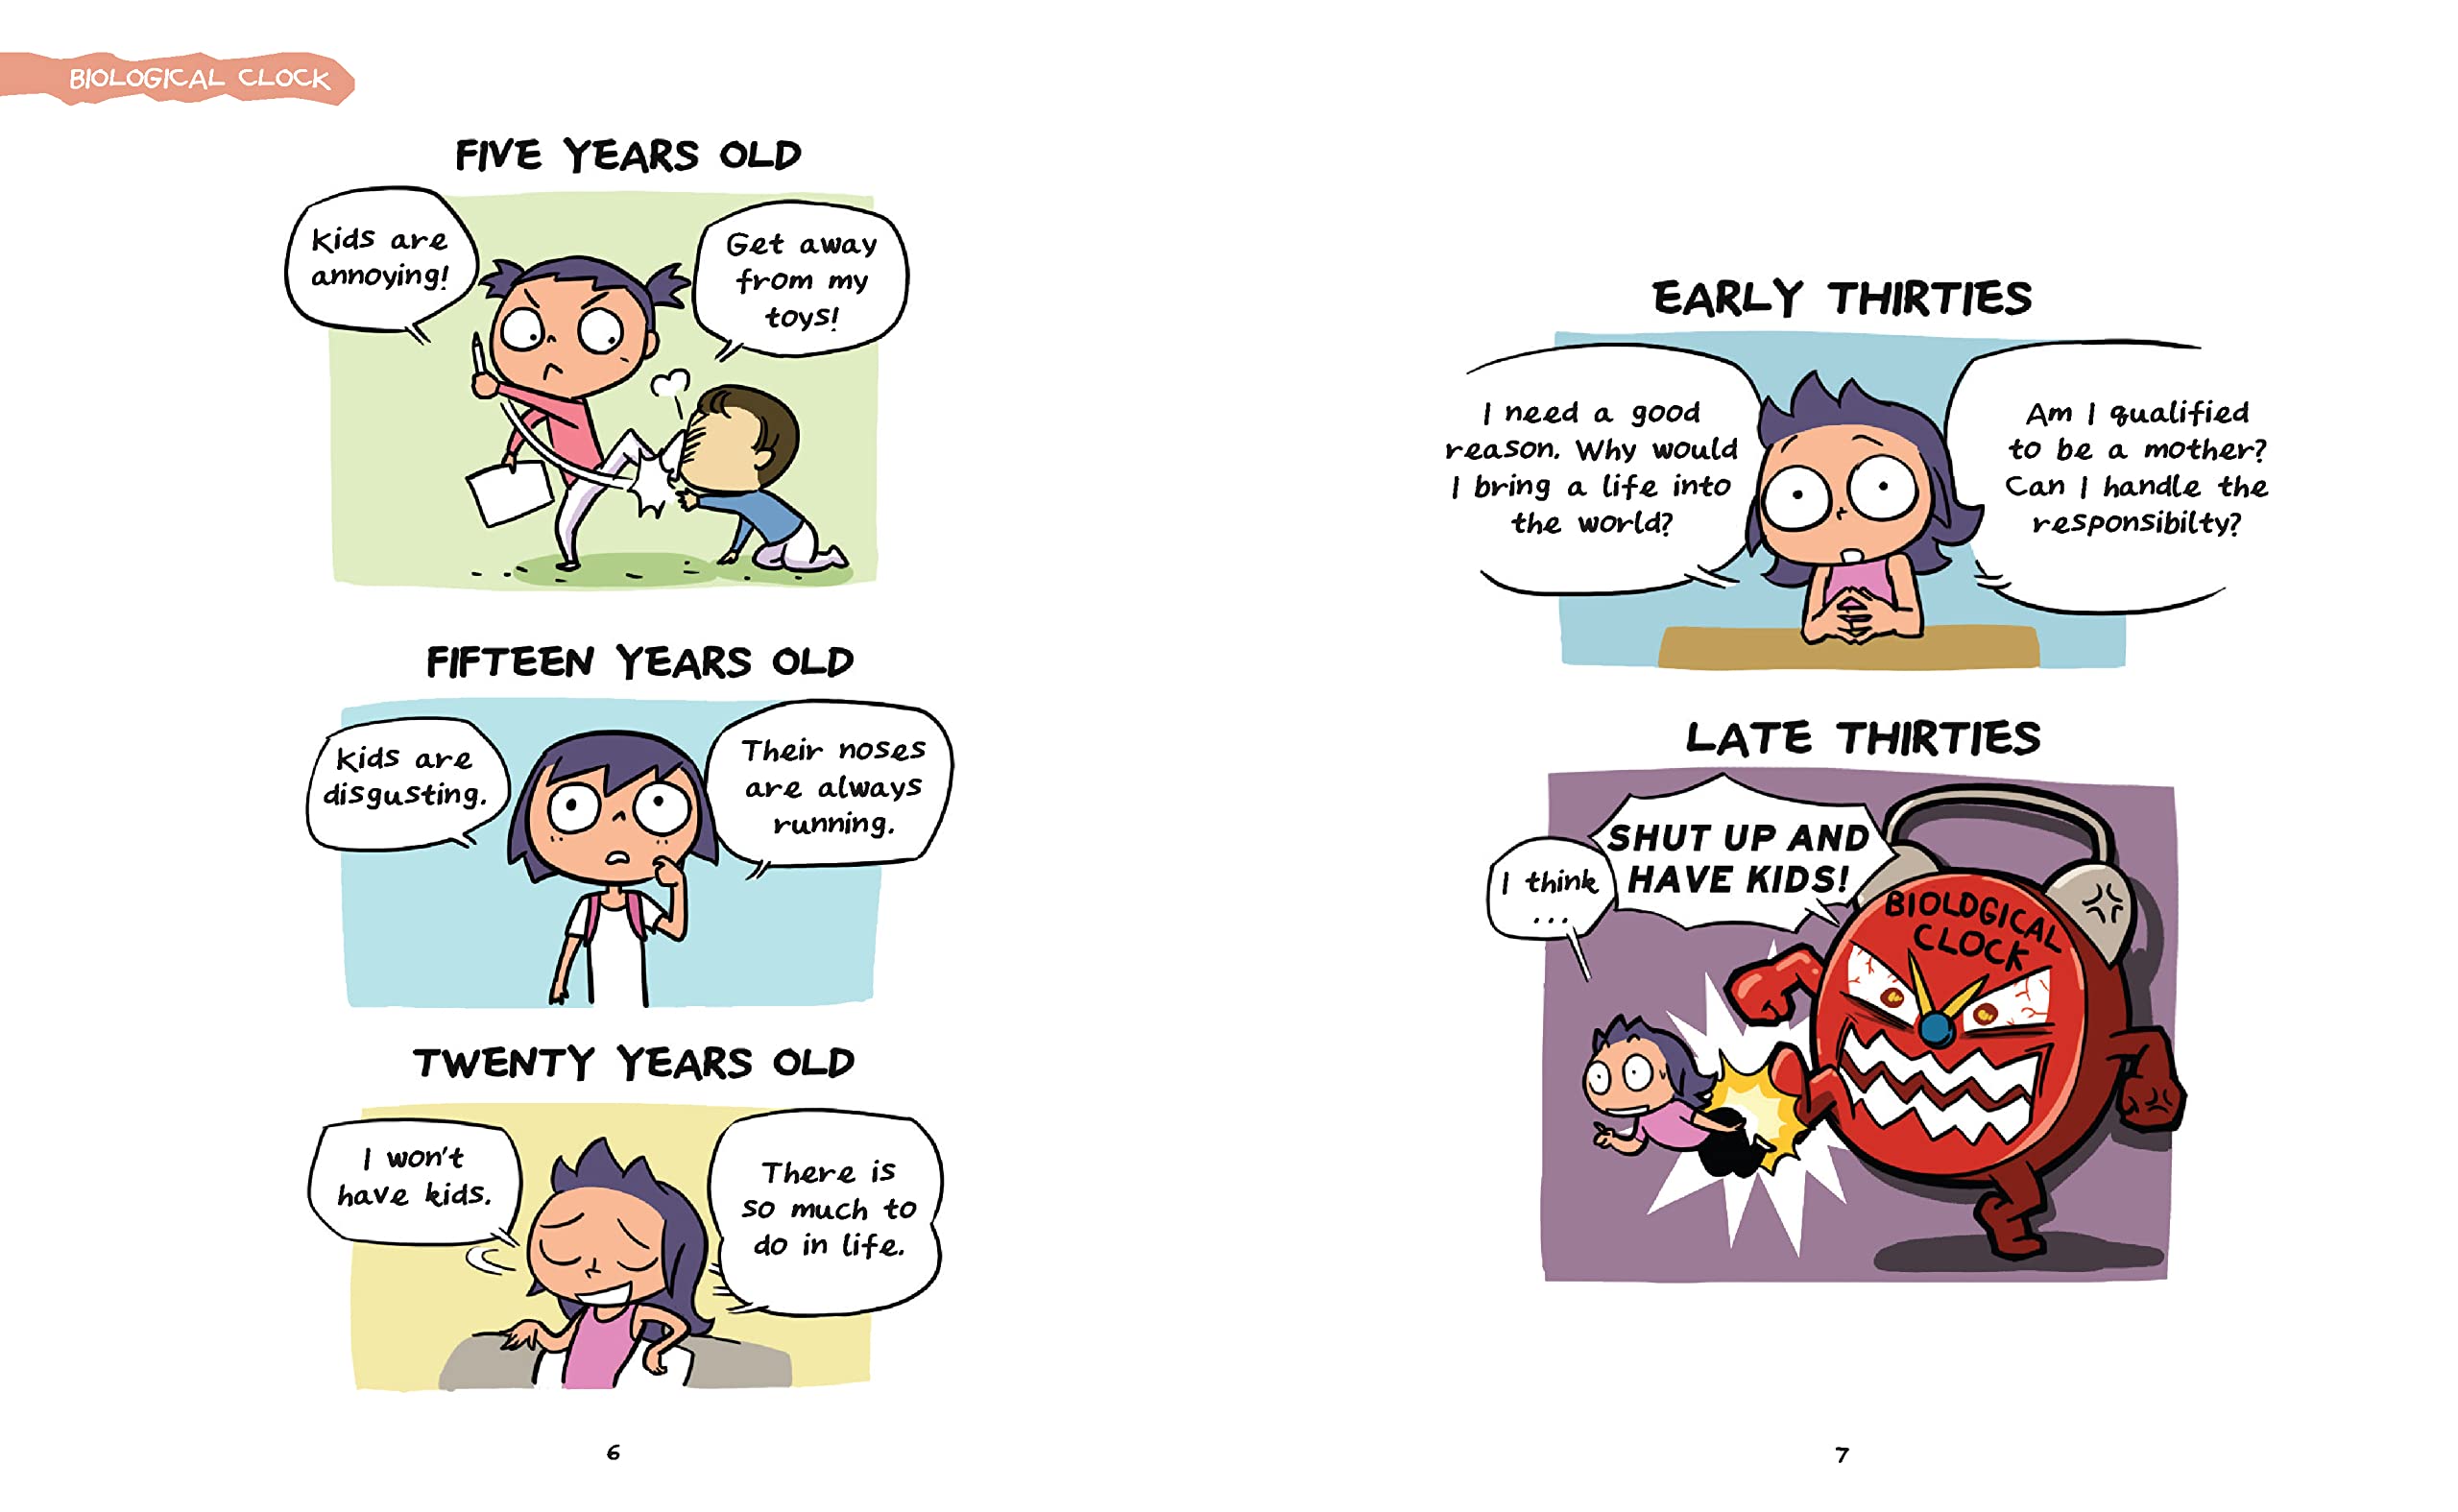 100 Ways Your Two-Year-Old Can Hurt You: Comics to Ease the Stress of Parenting